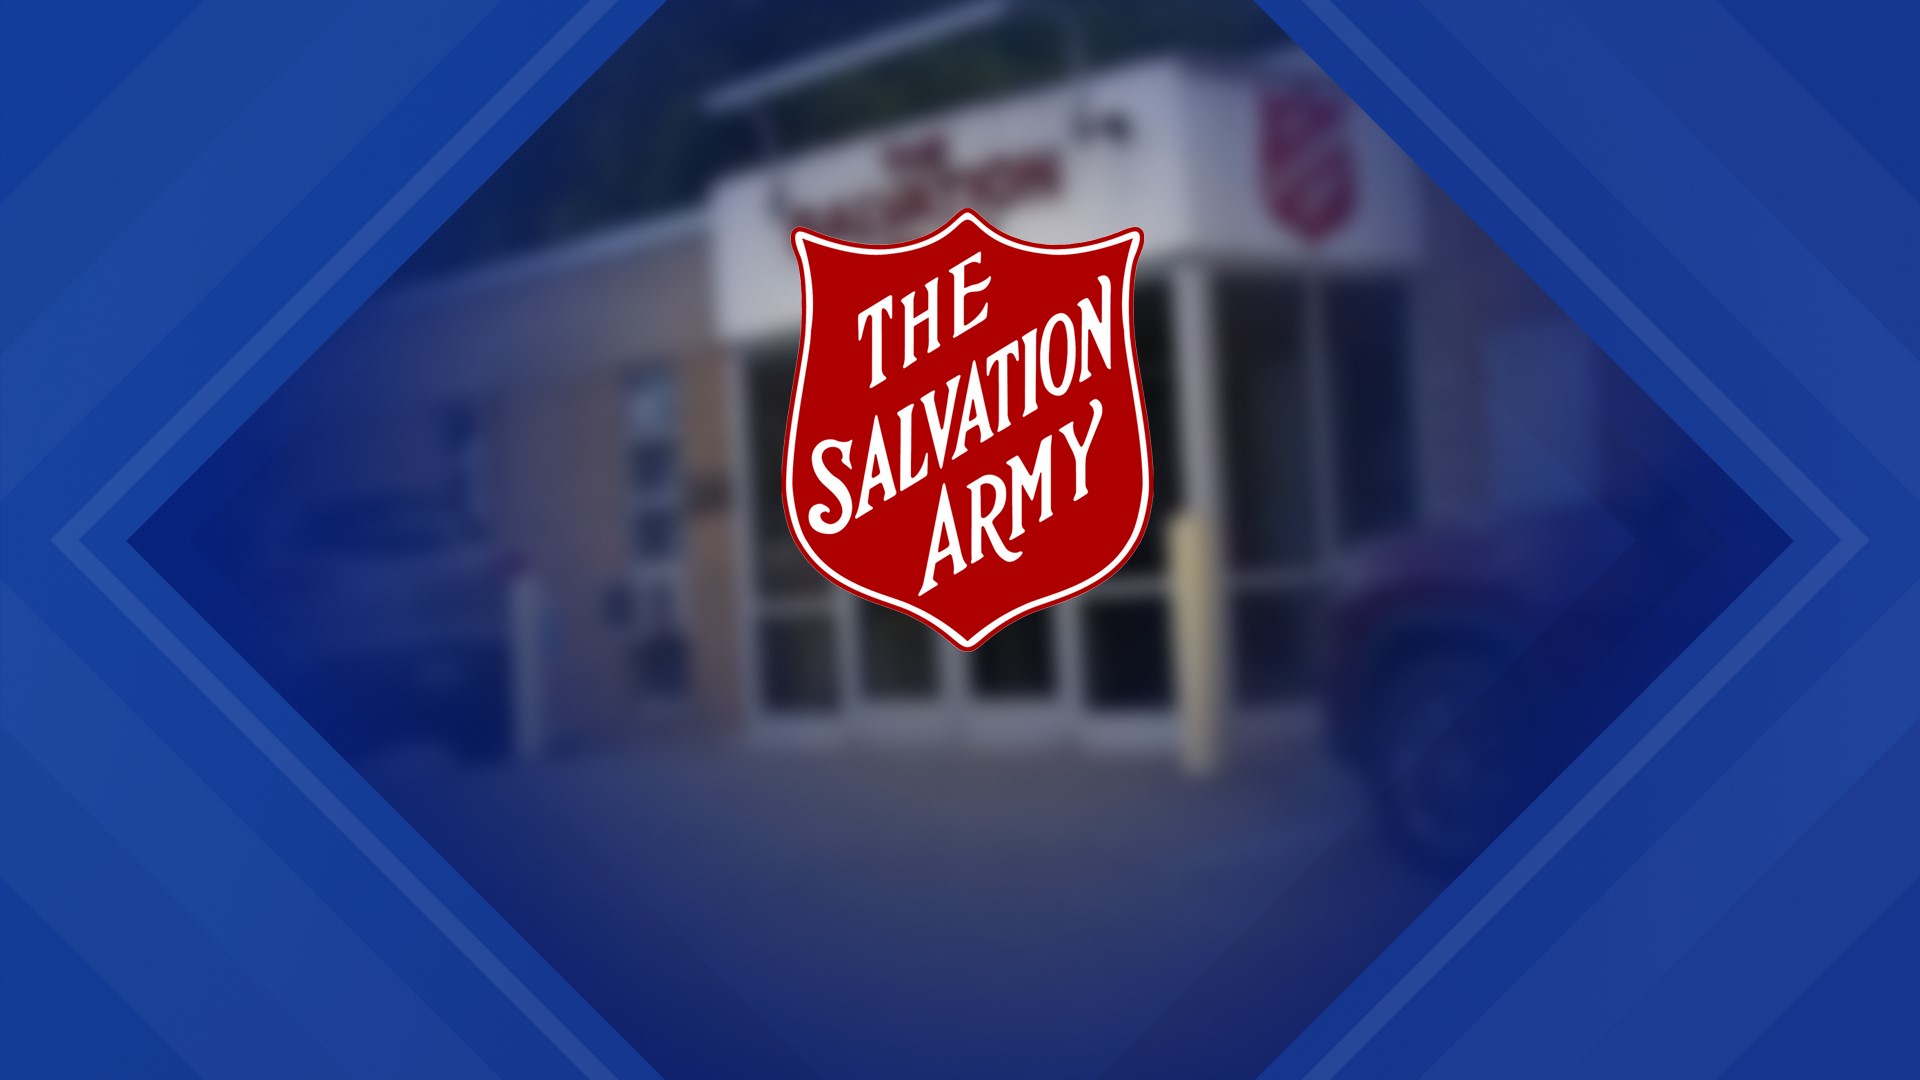 The Salvation Army of East Stroudsburg is searching for bell ringer volunteers earlier this year for their Red Kettle Campaign.